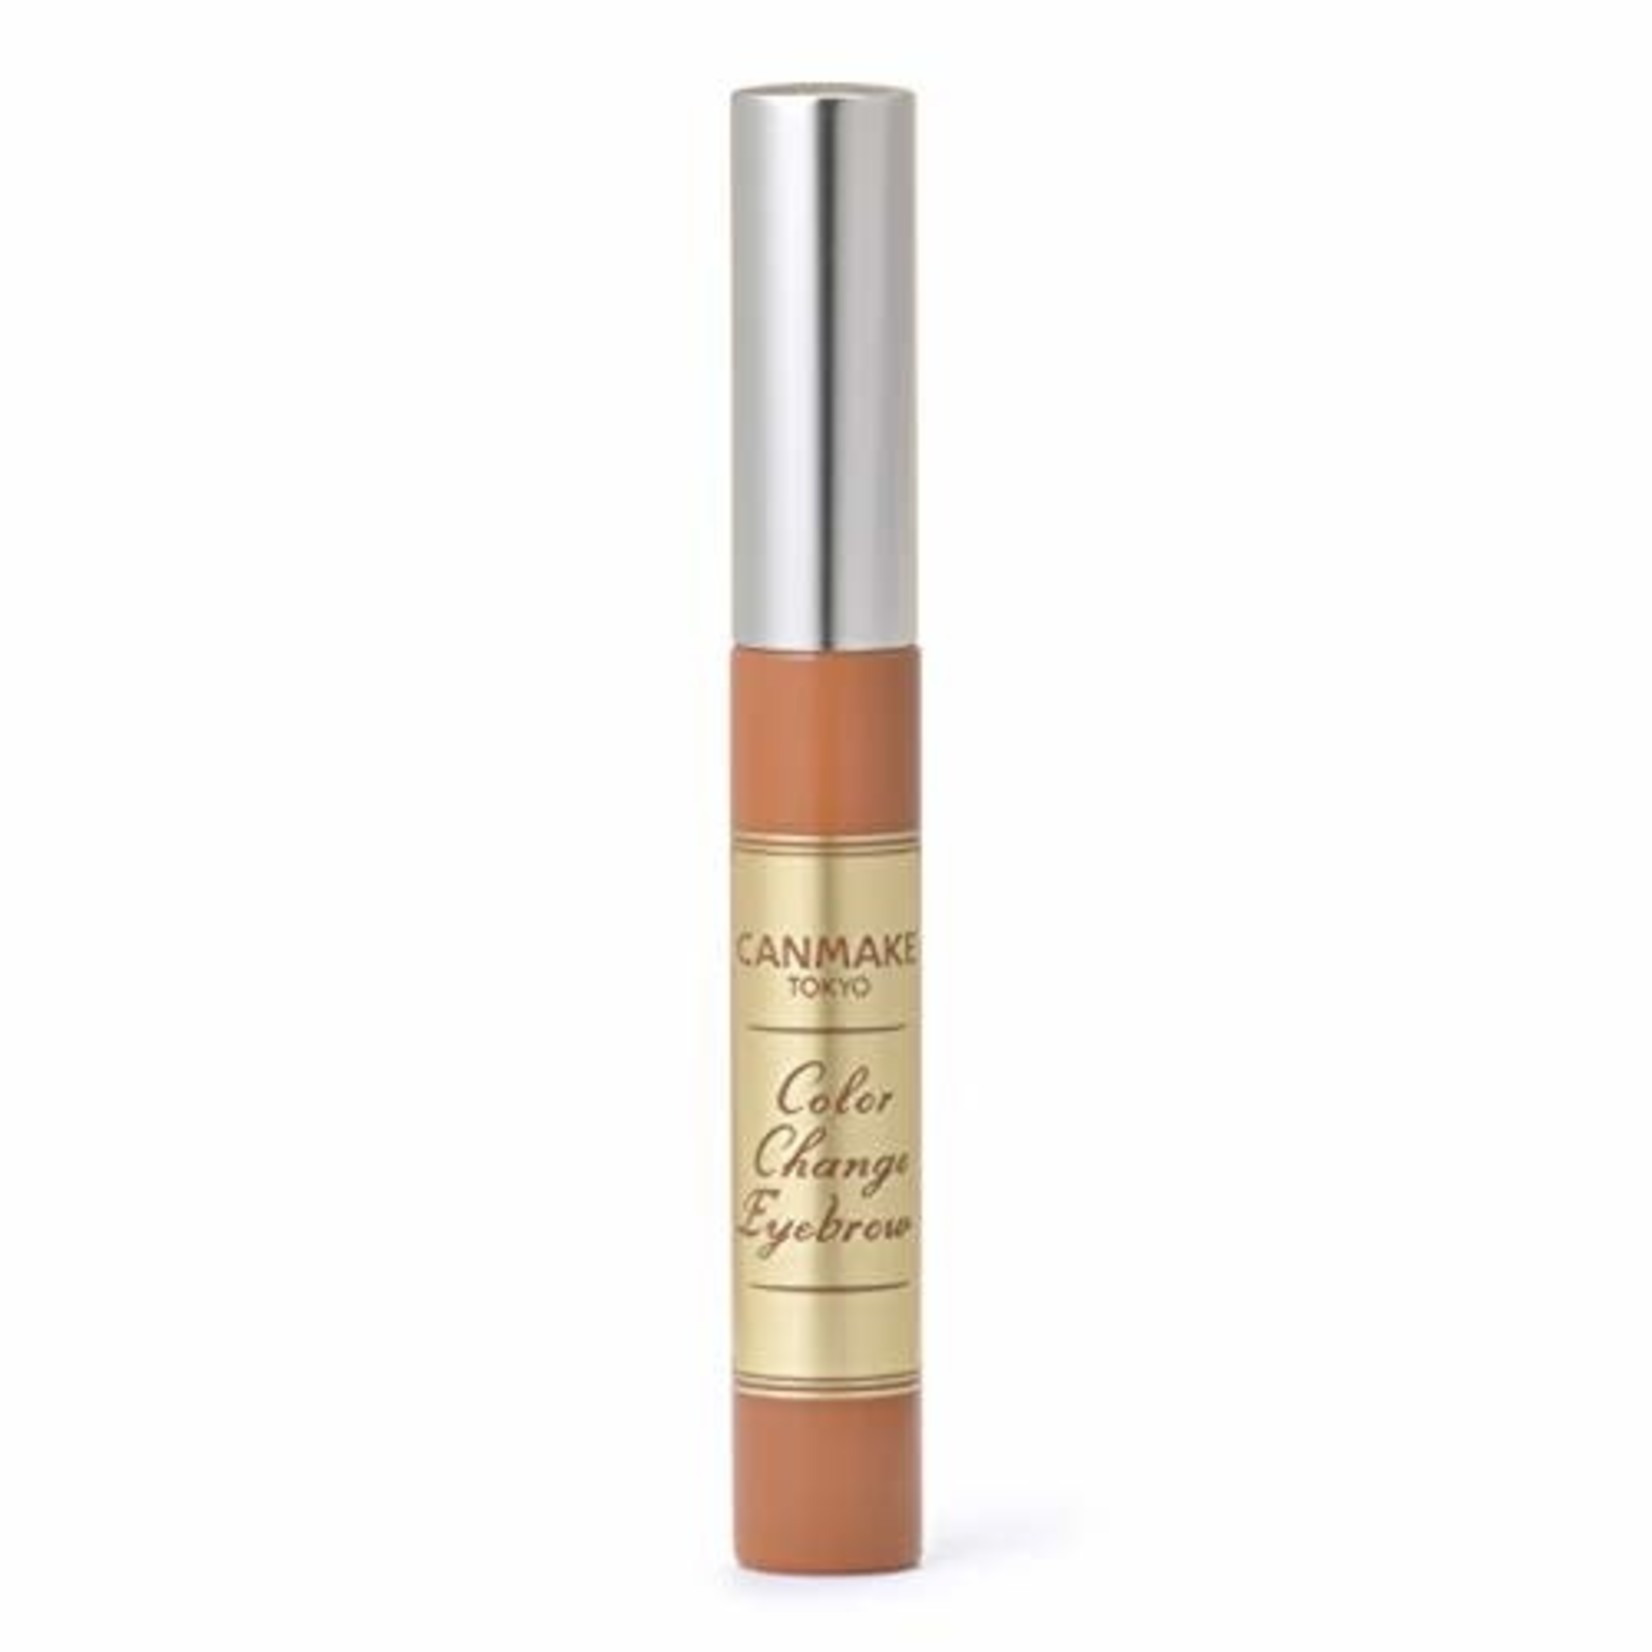 Canmake Canmake Color Change Eyebrow 02 Honey Brown